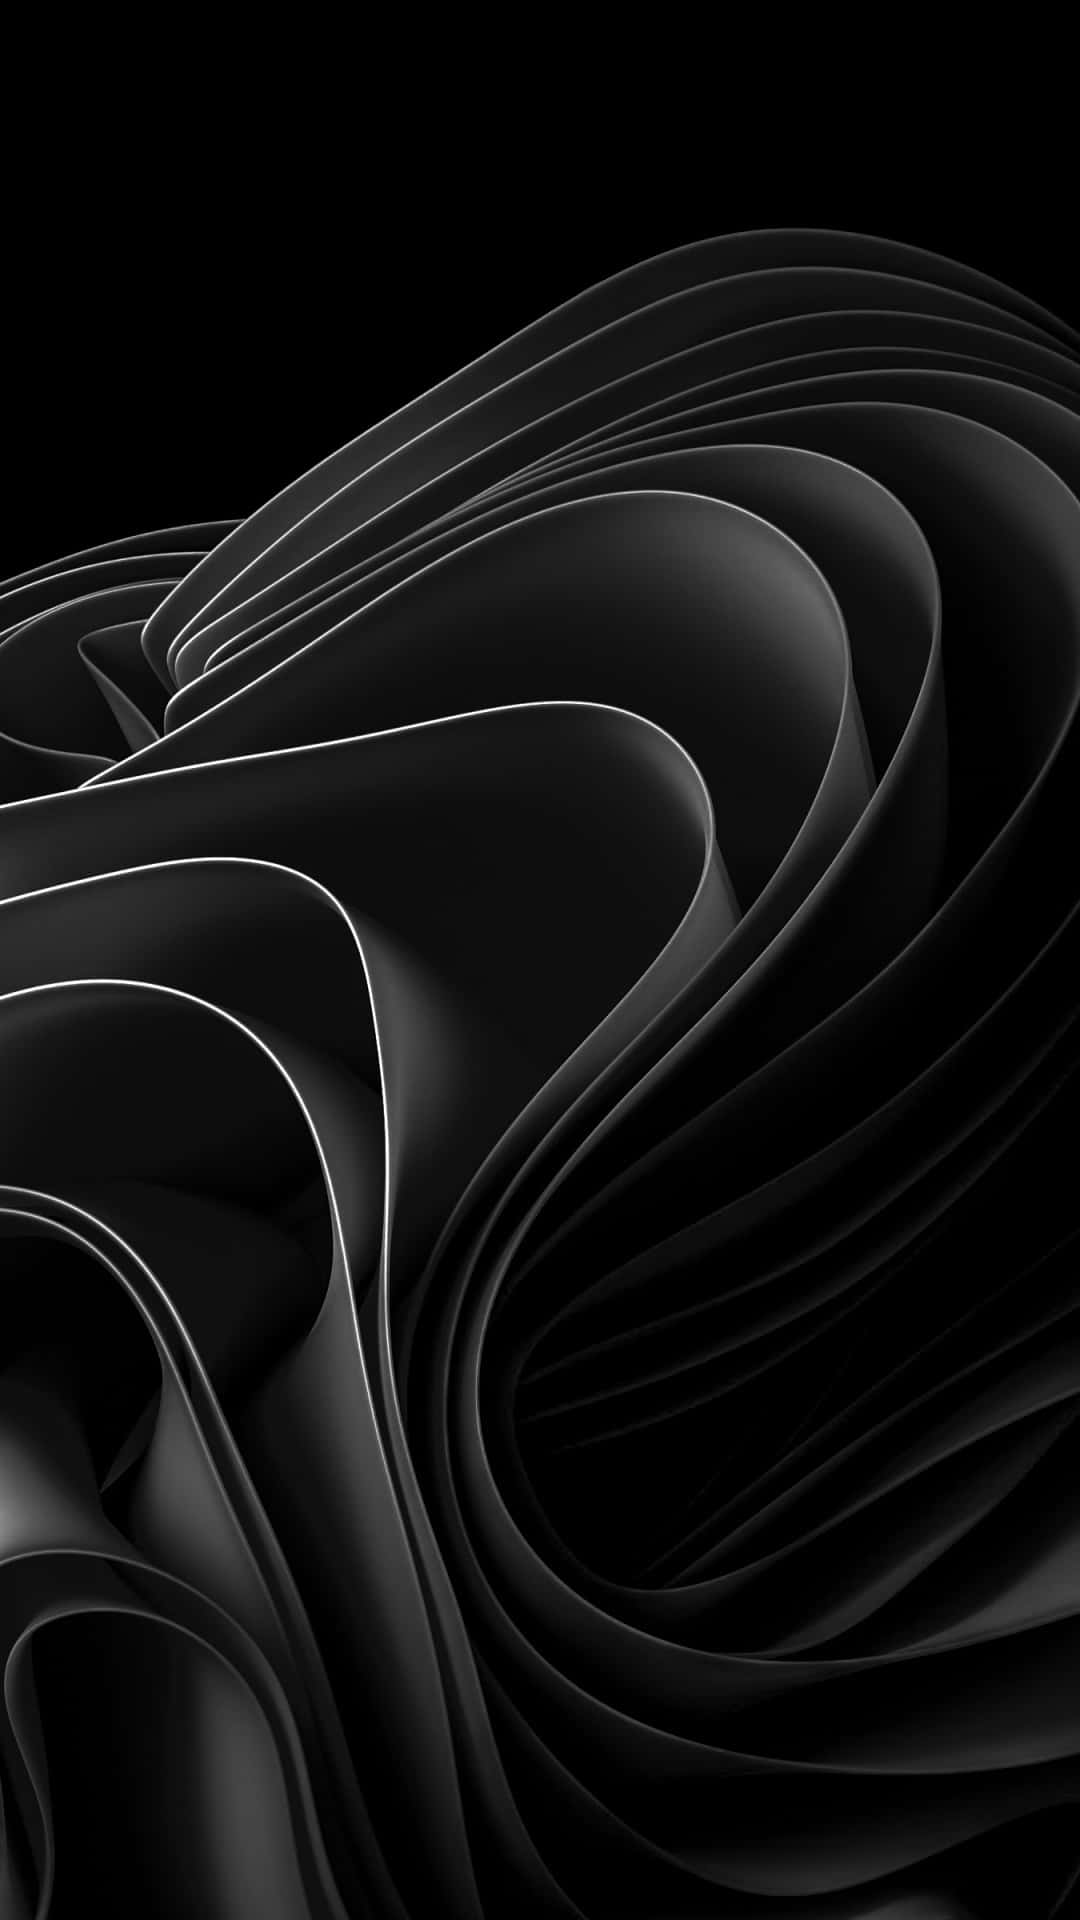 Black Abstract Wavy Pattern On Black Background